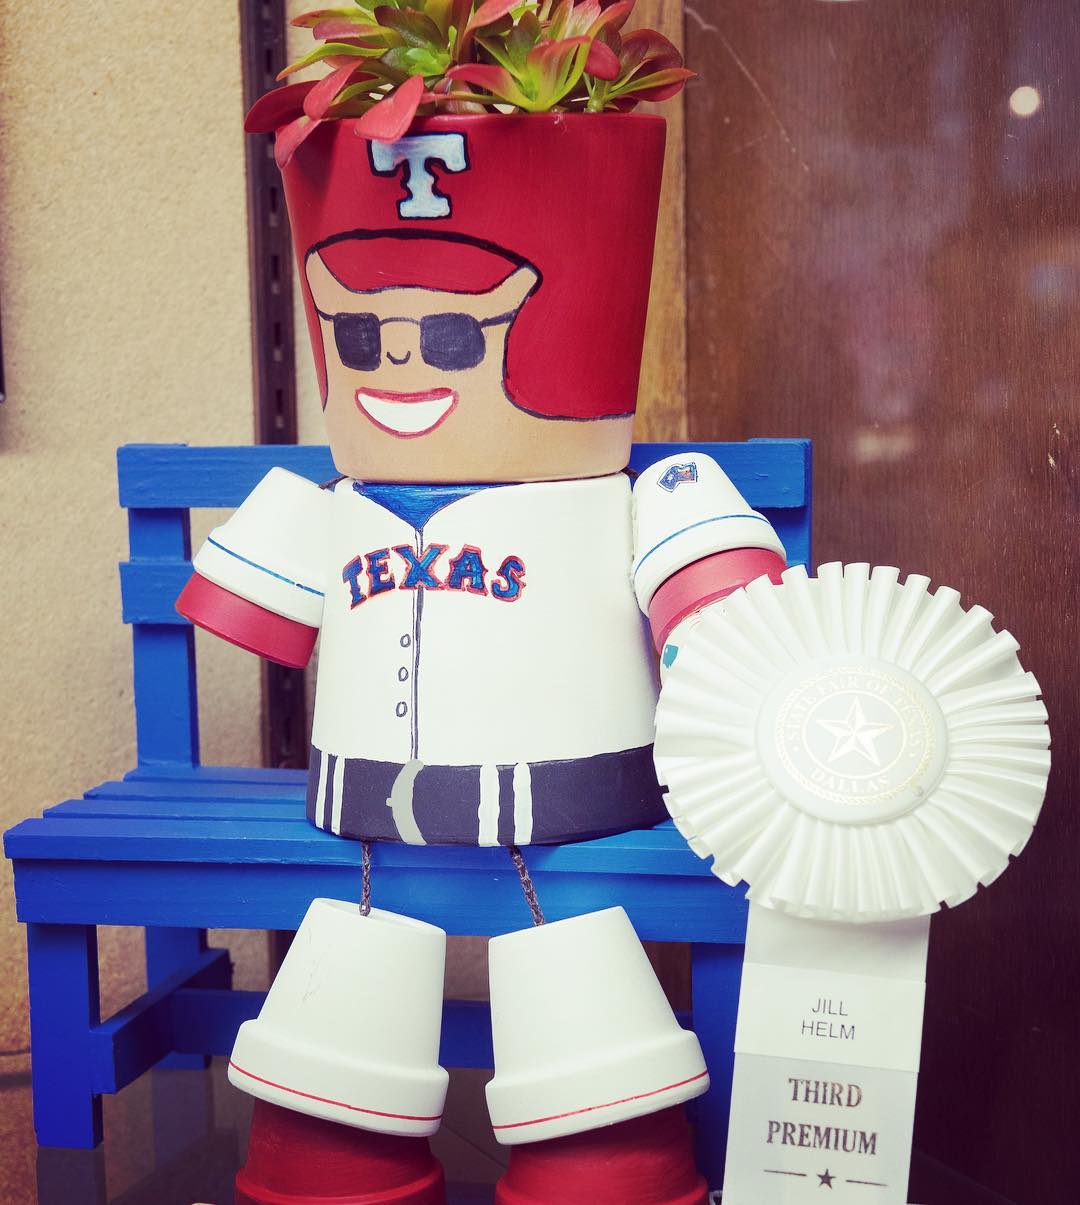 ‪It’s almost game time! Check out this @Rangers inspired Creative Arts winning entry from 2017! #BigTex Make 2019 the year you win a @StateFairOfTX ribbon! 🤠